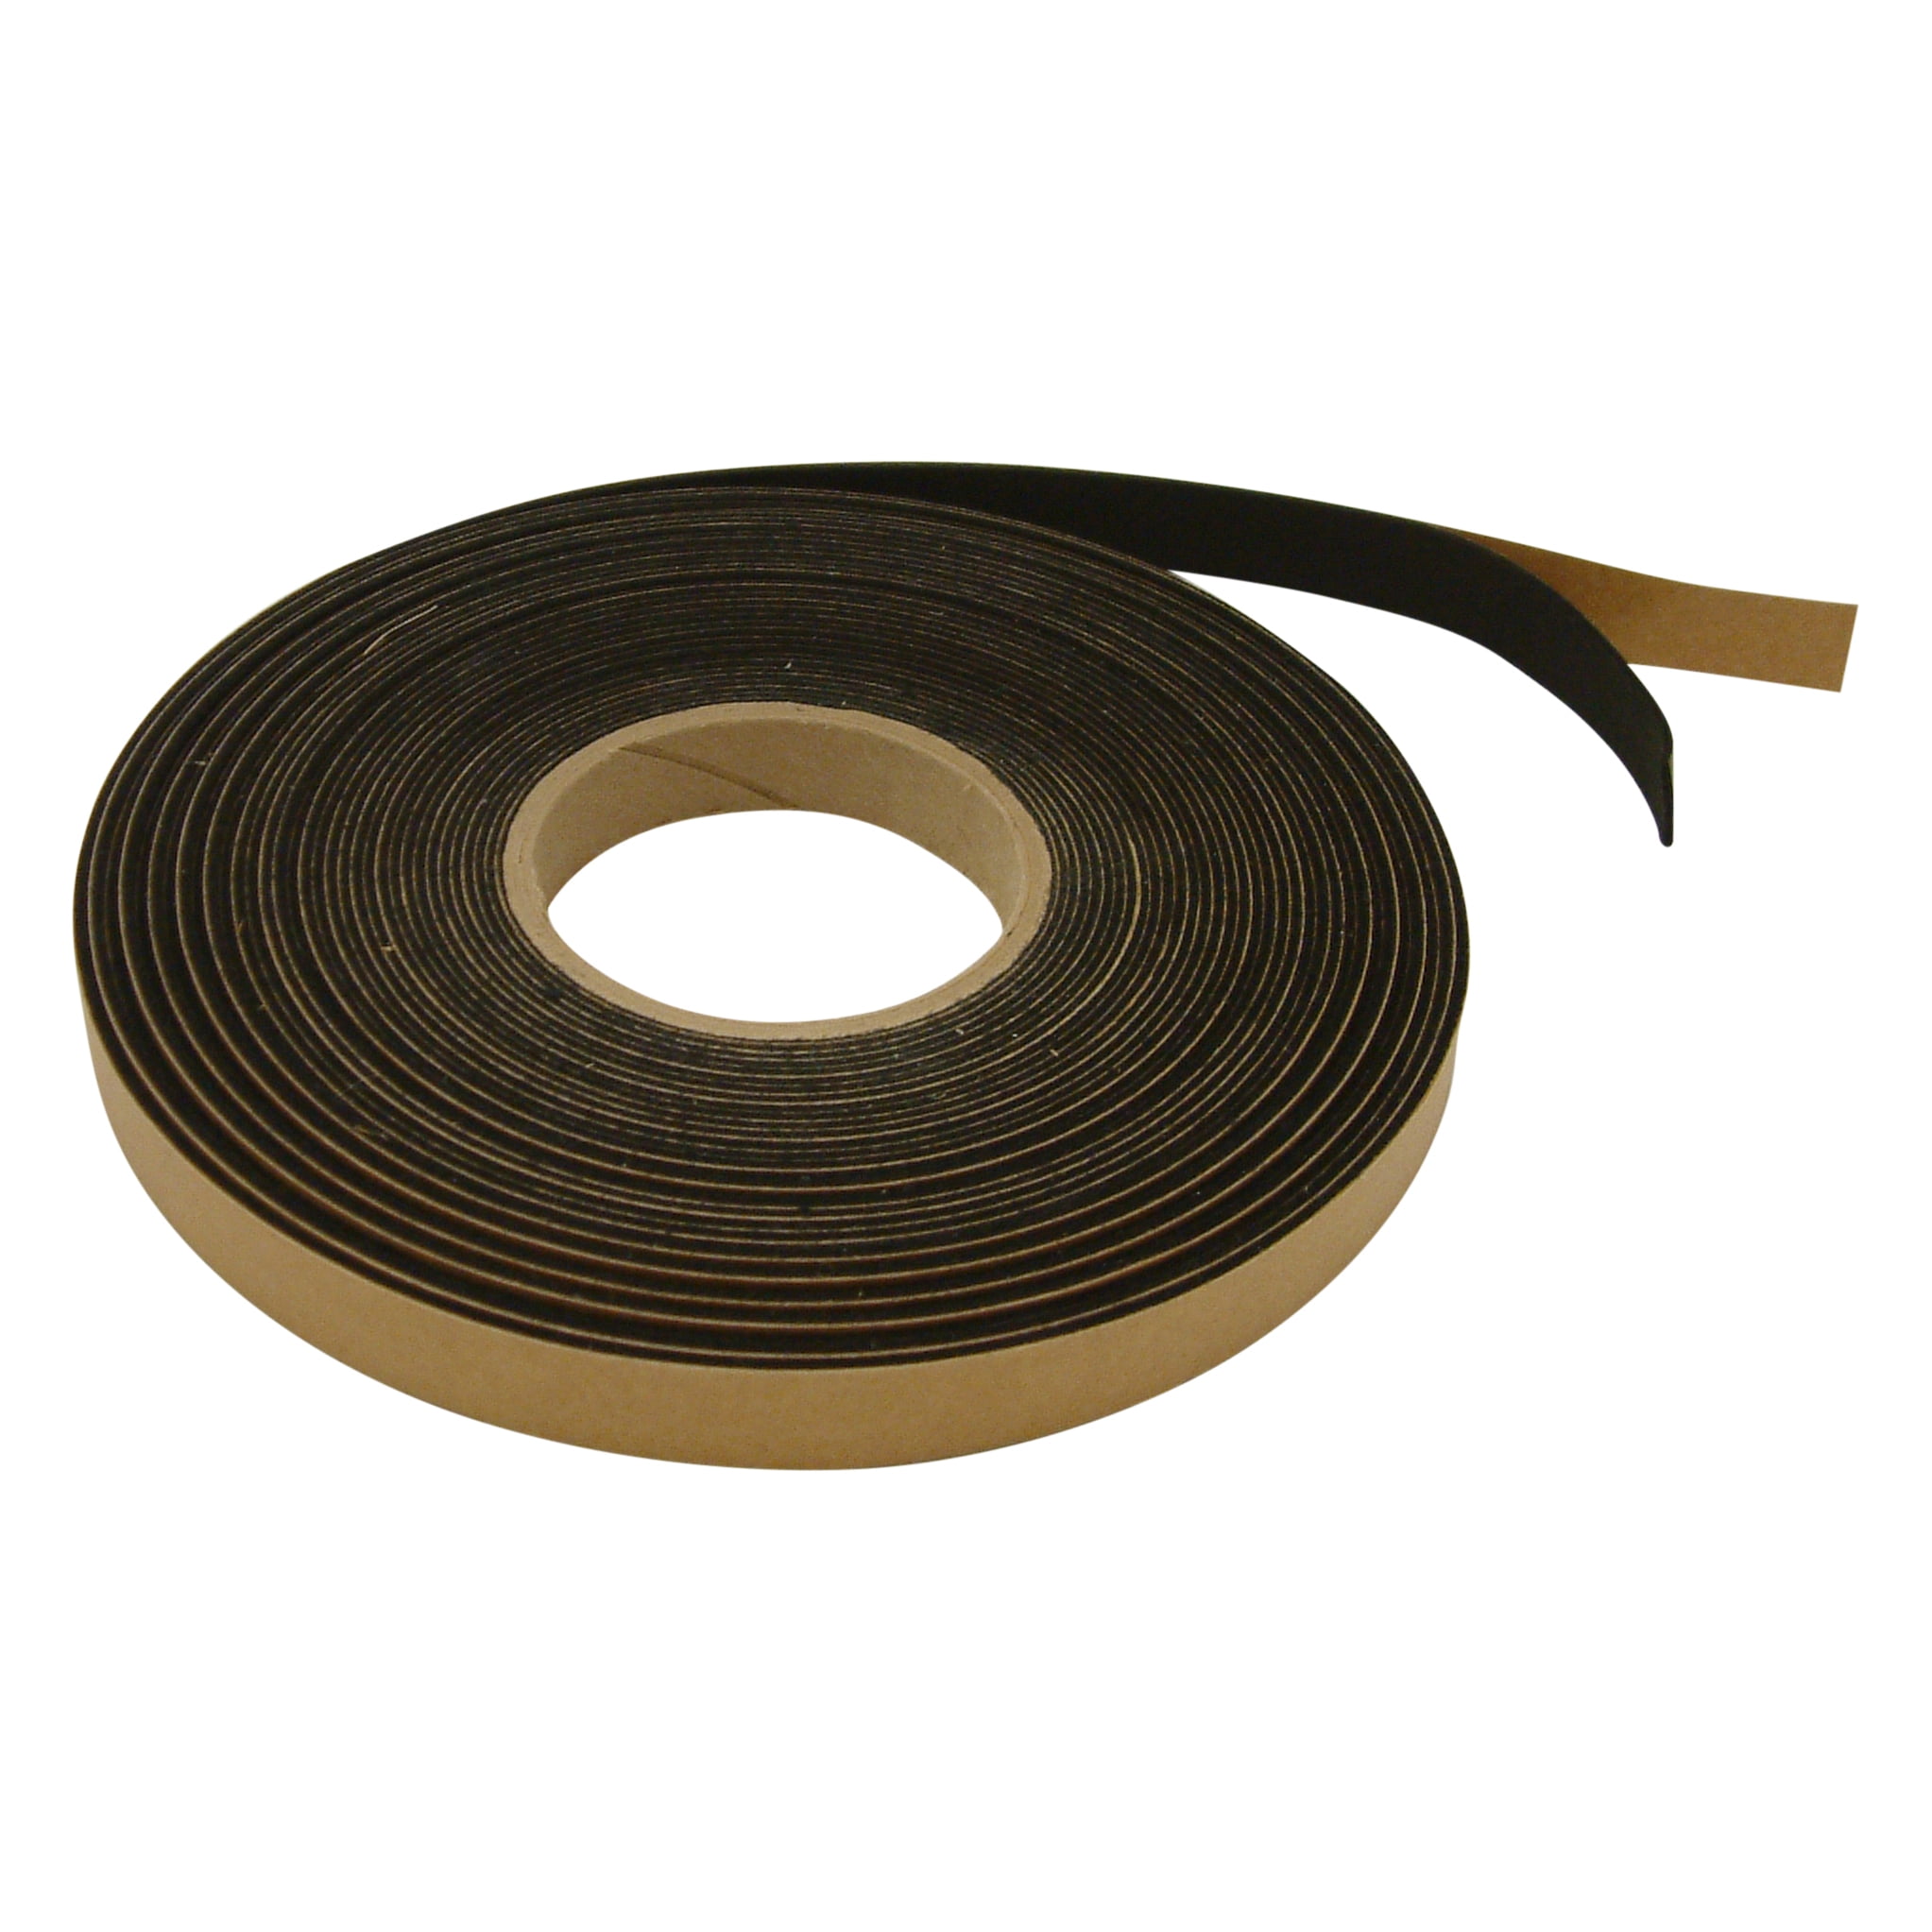 Black Felt Stripping, Adhesive Backed 3 Wide x 3mm (.118”) Thick, 50' Roll  - The Felt Company